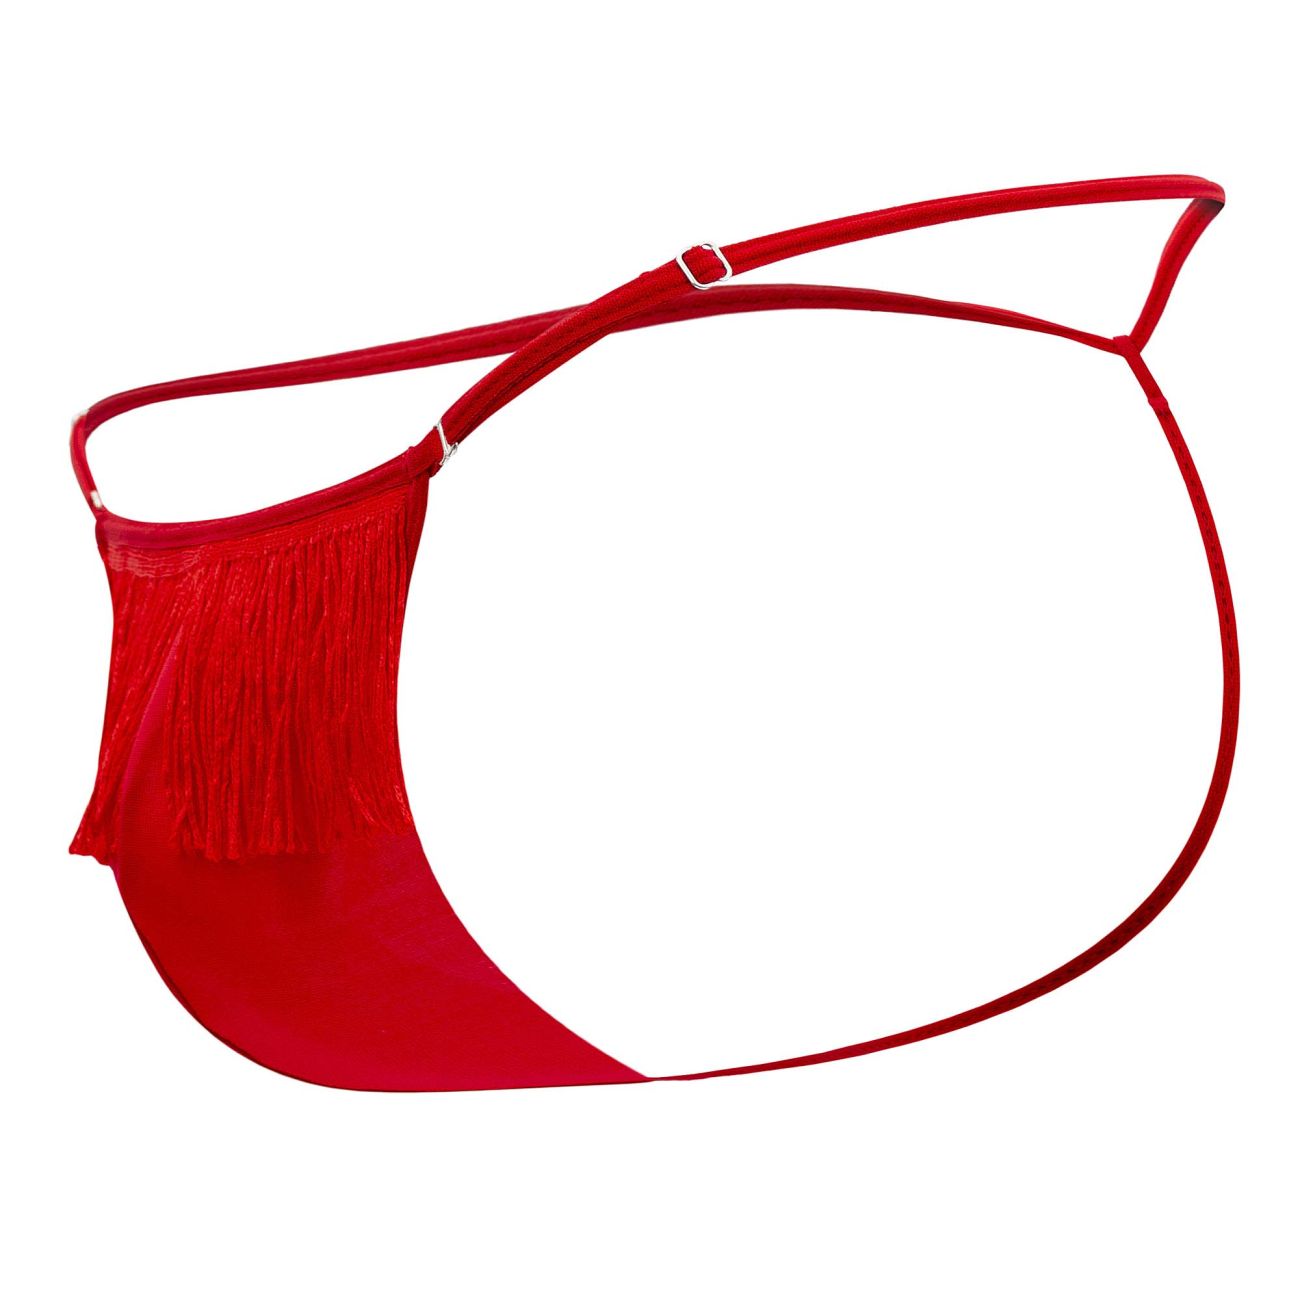 Roger Smuth RS083 G-String Red